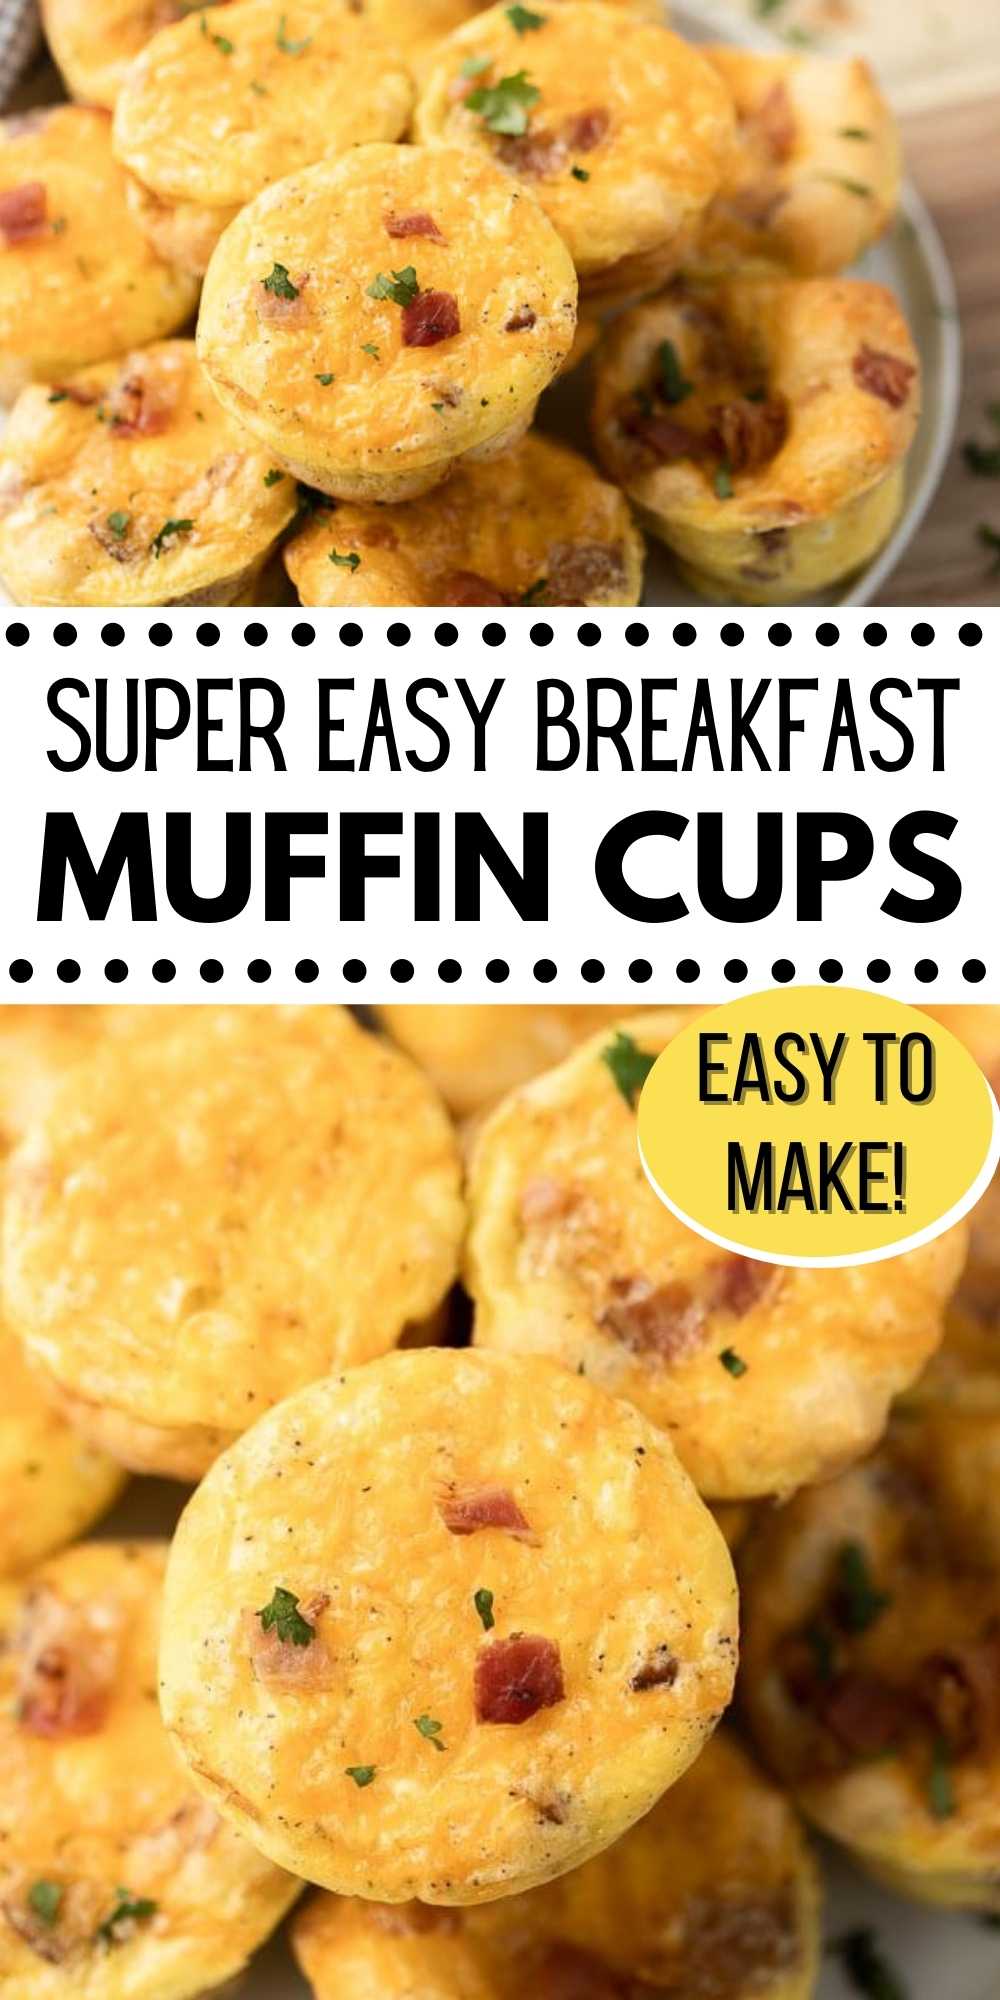 Breakfast egg muffins - easy crescent roll egg cups